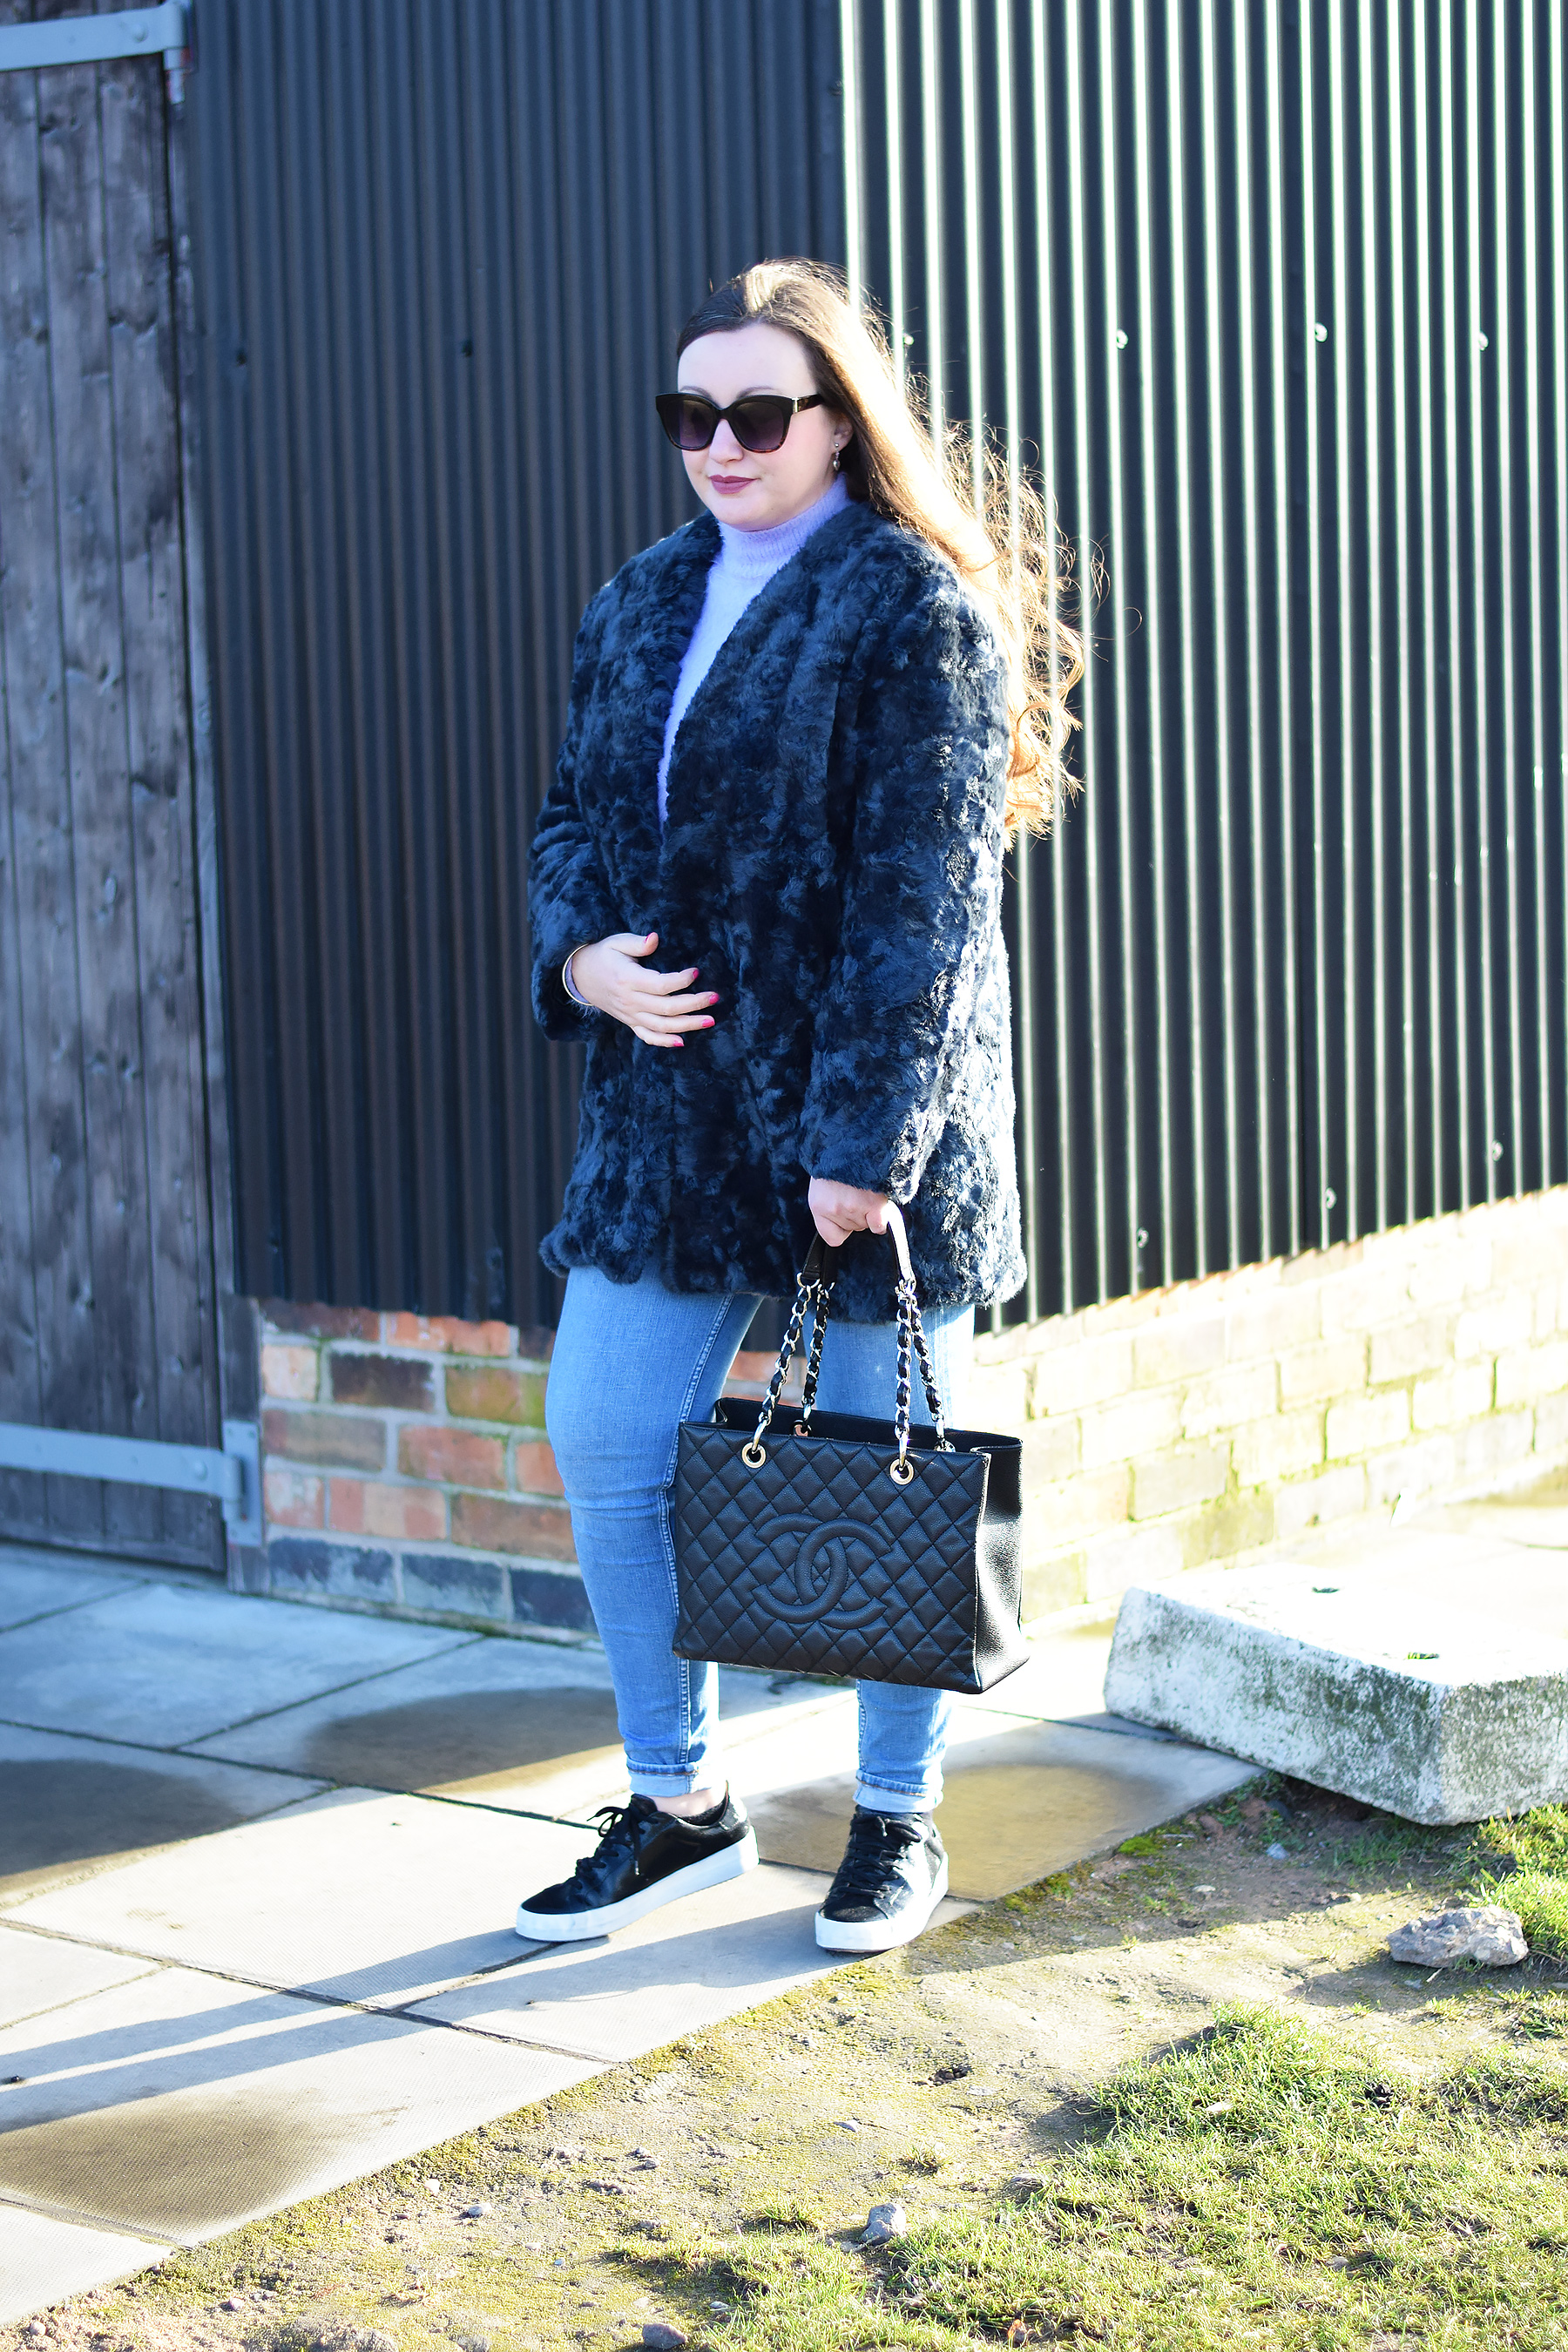 Fashion trends aw17 outfit inspiration - Navy Faux Fur Coat Outfit